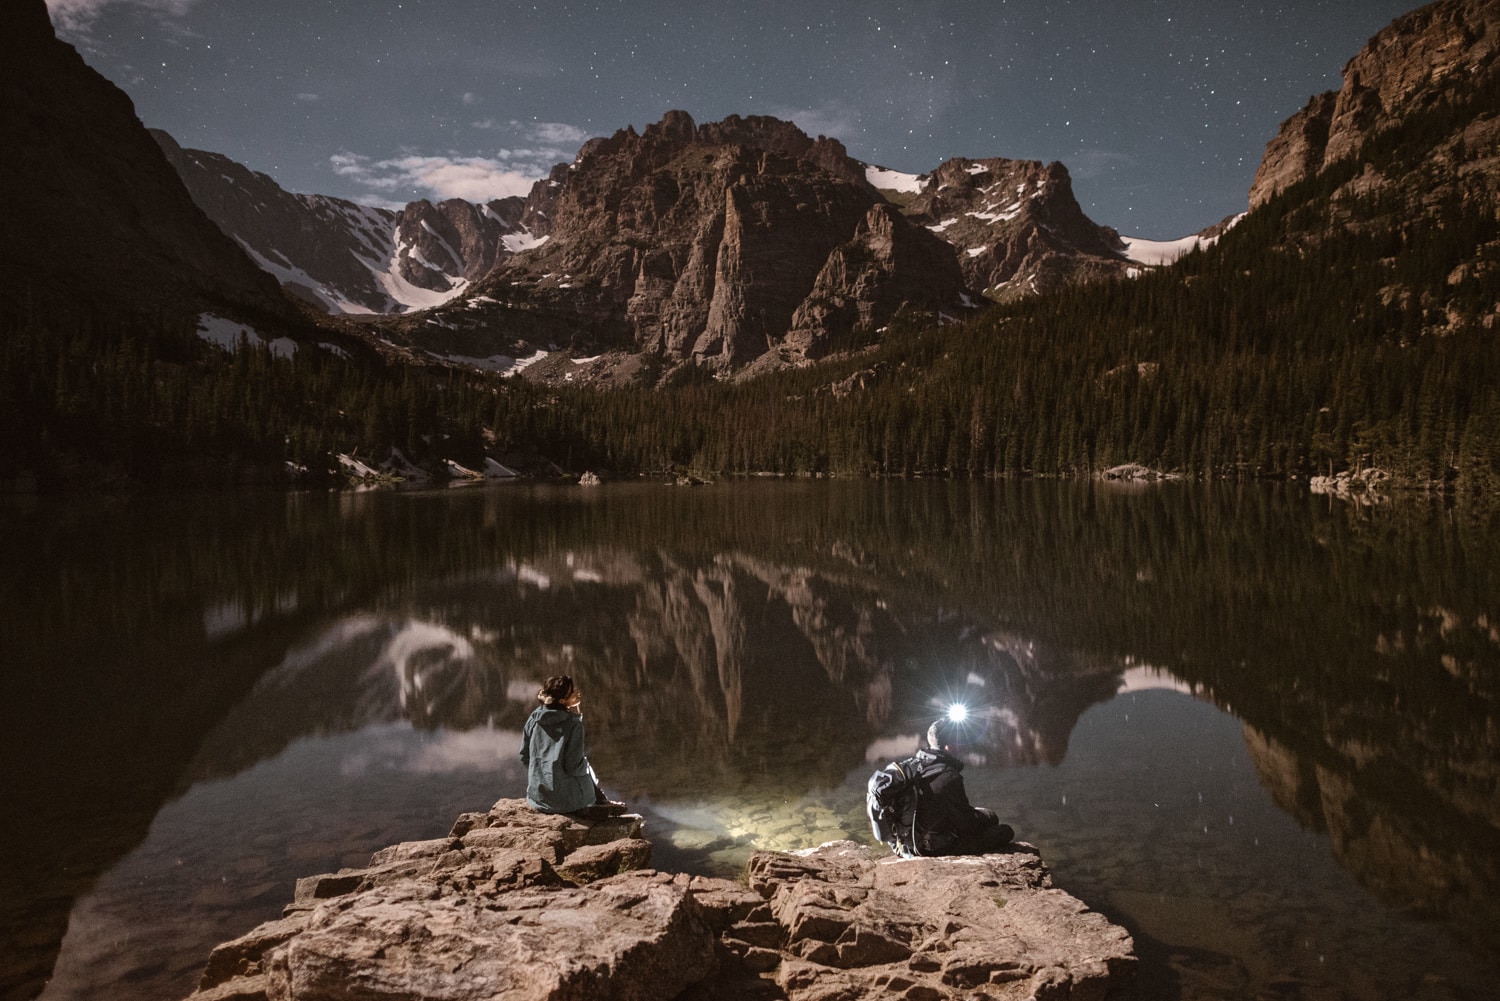 bride and groom sitting on rocks at the edge of an alpine lake at night. There are stars in the sky, and snow-covered mountains in the background. 